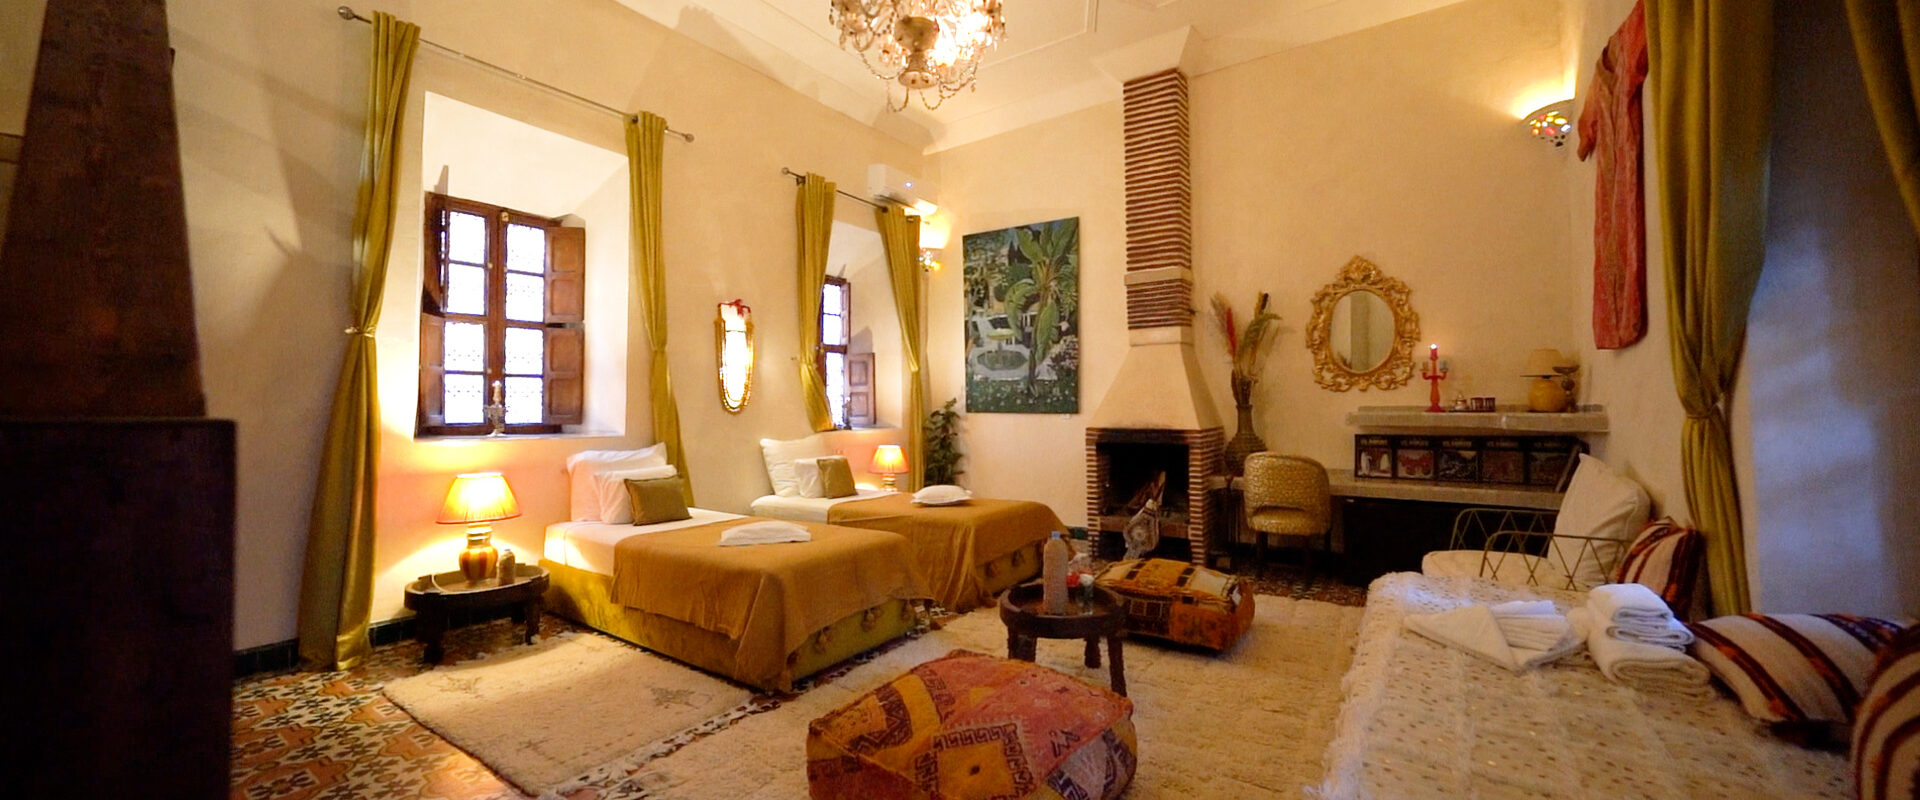 Suite Riad Chambres dAmis